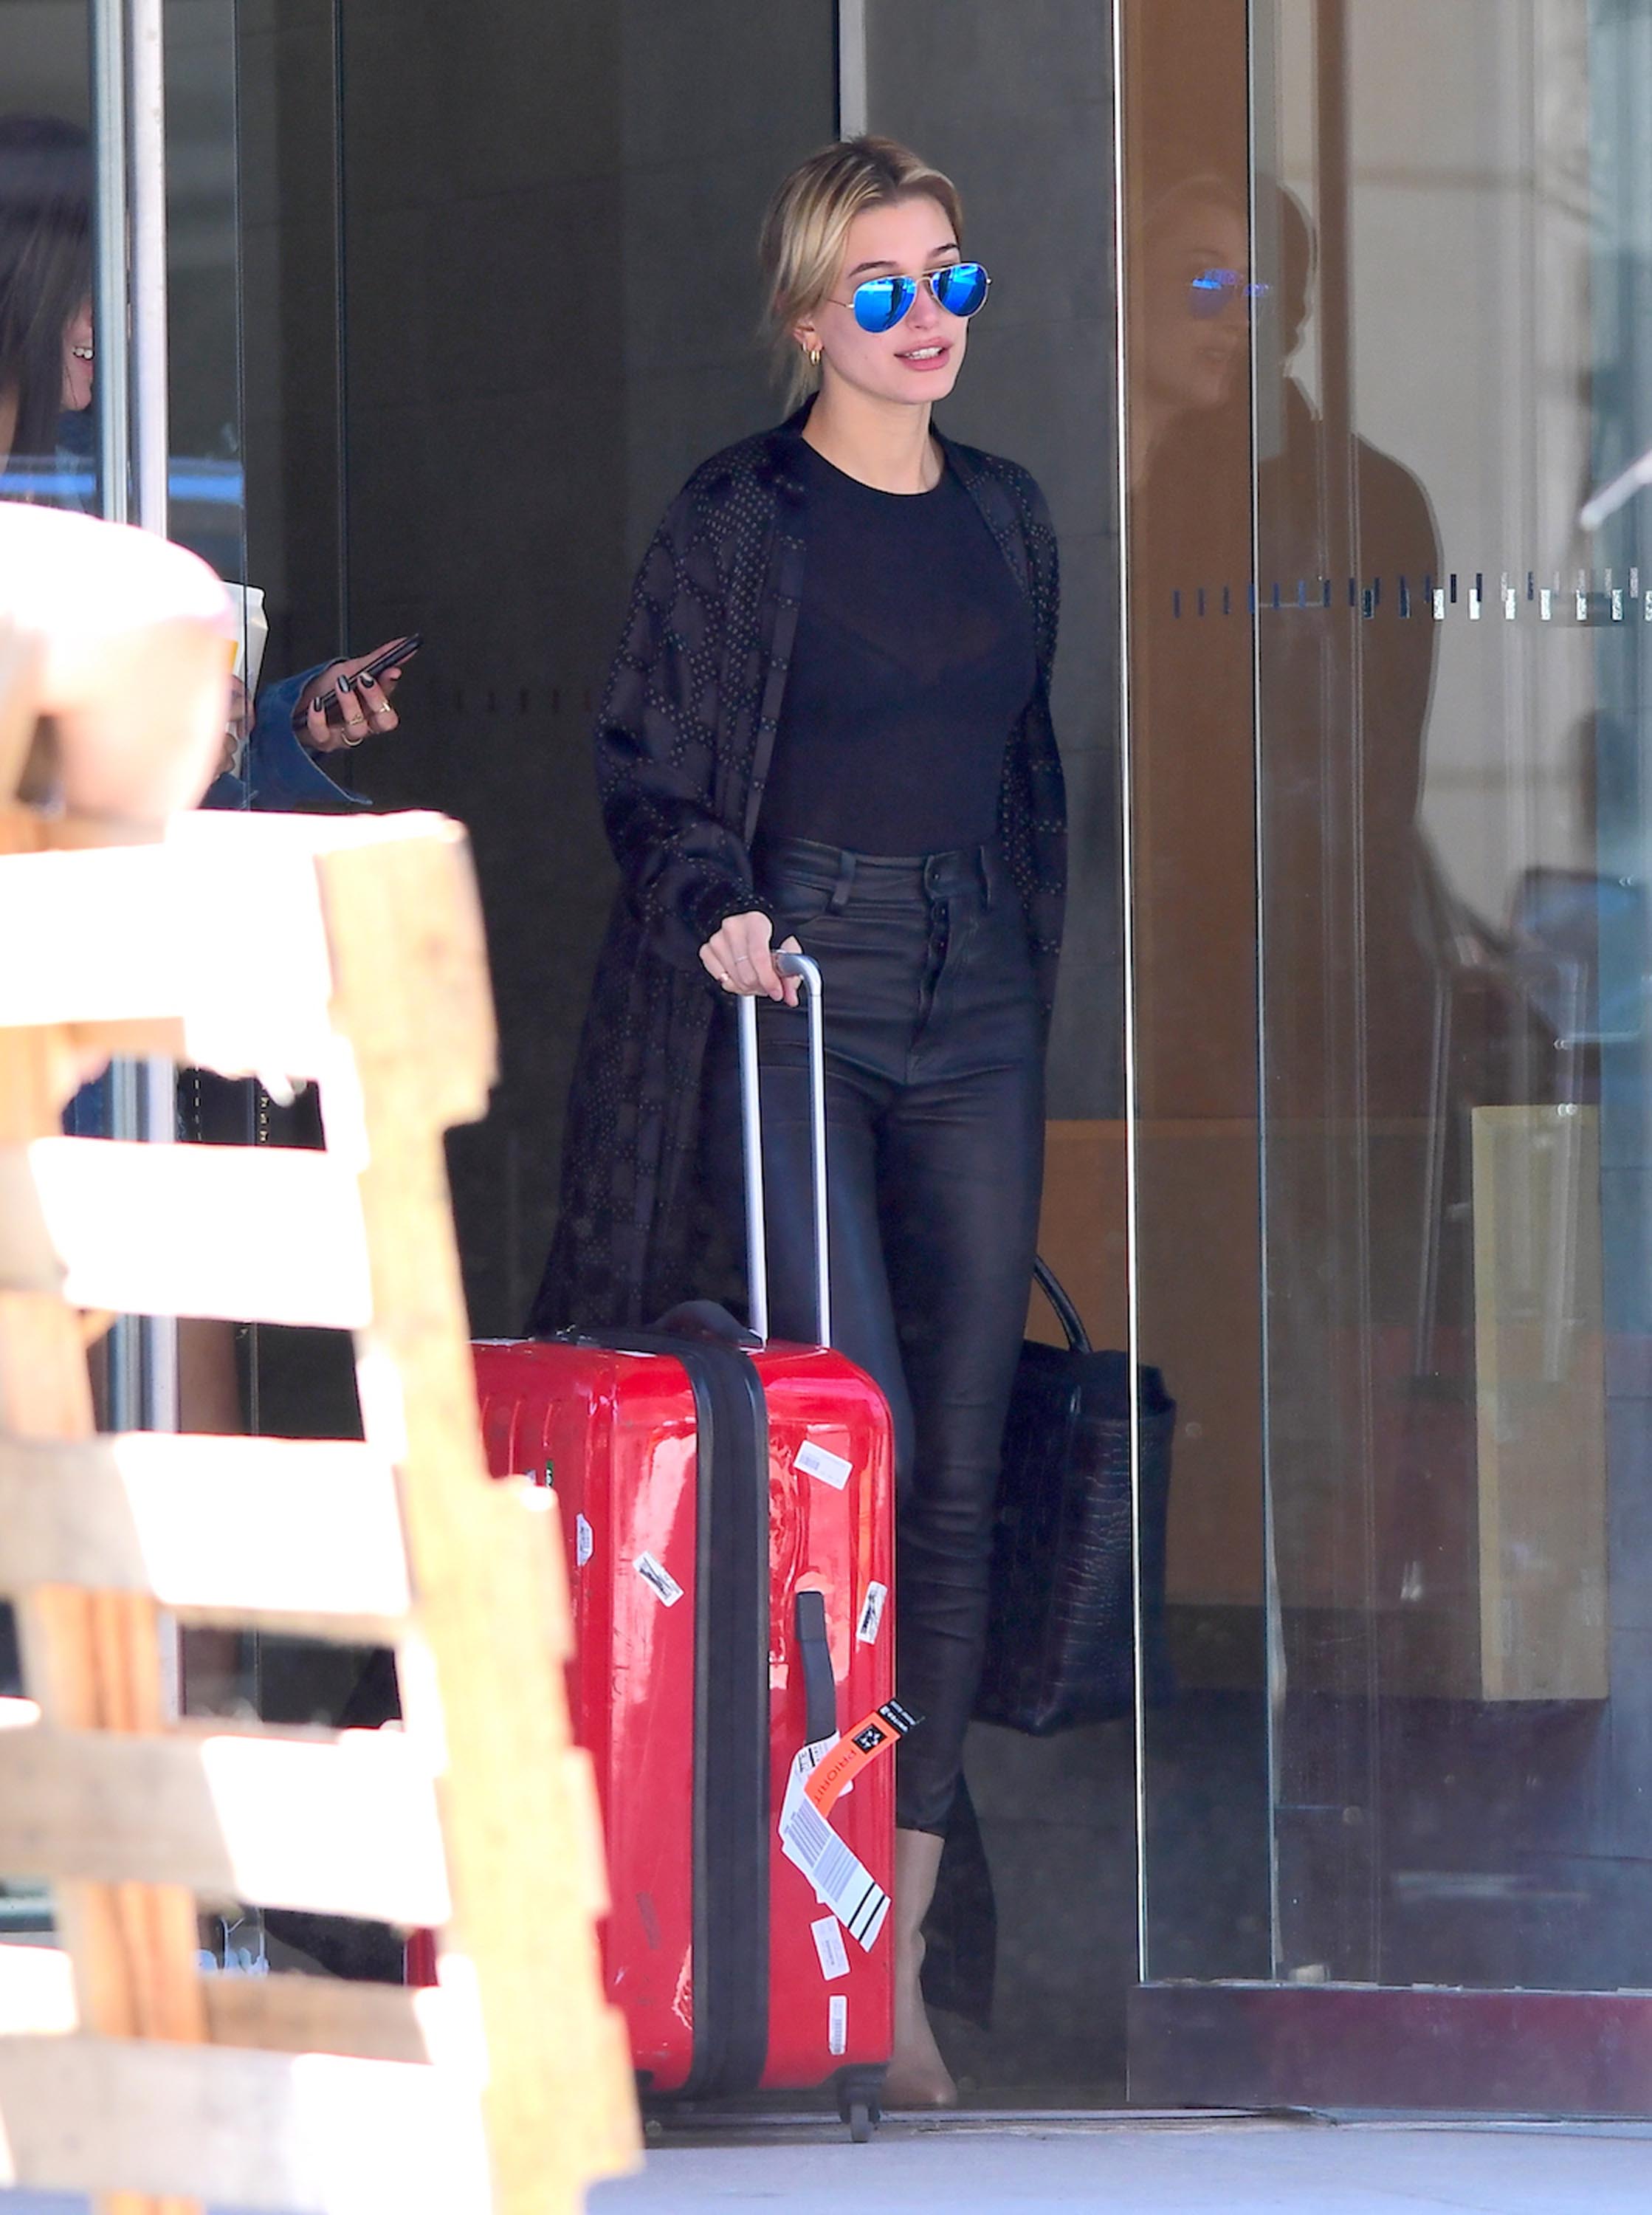 Hailey Baldwin was spotted catching an early morning flight in NYC